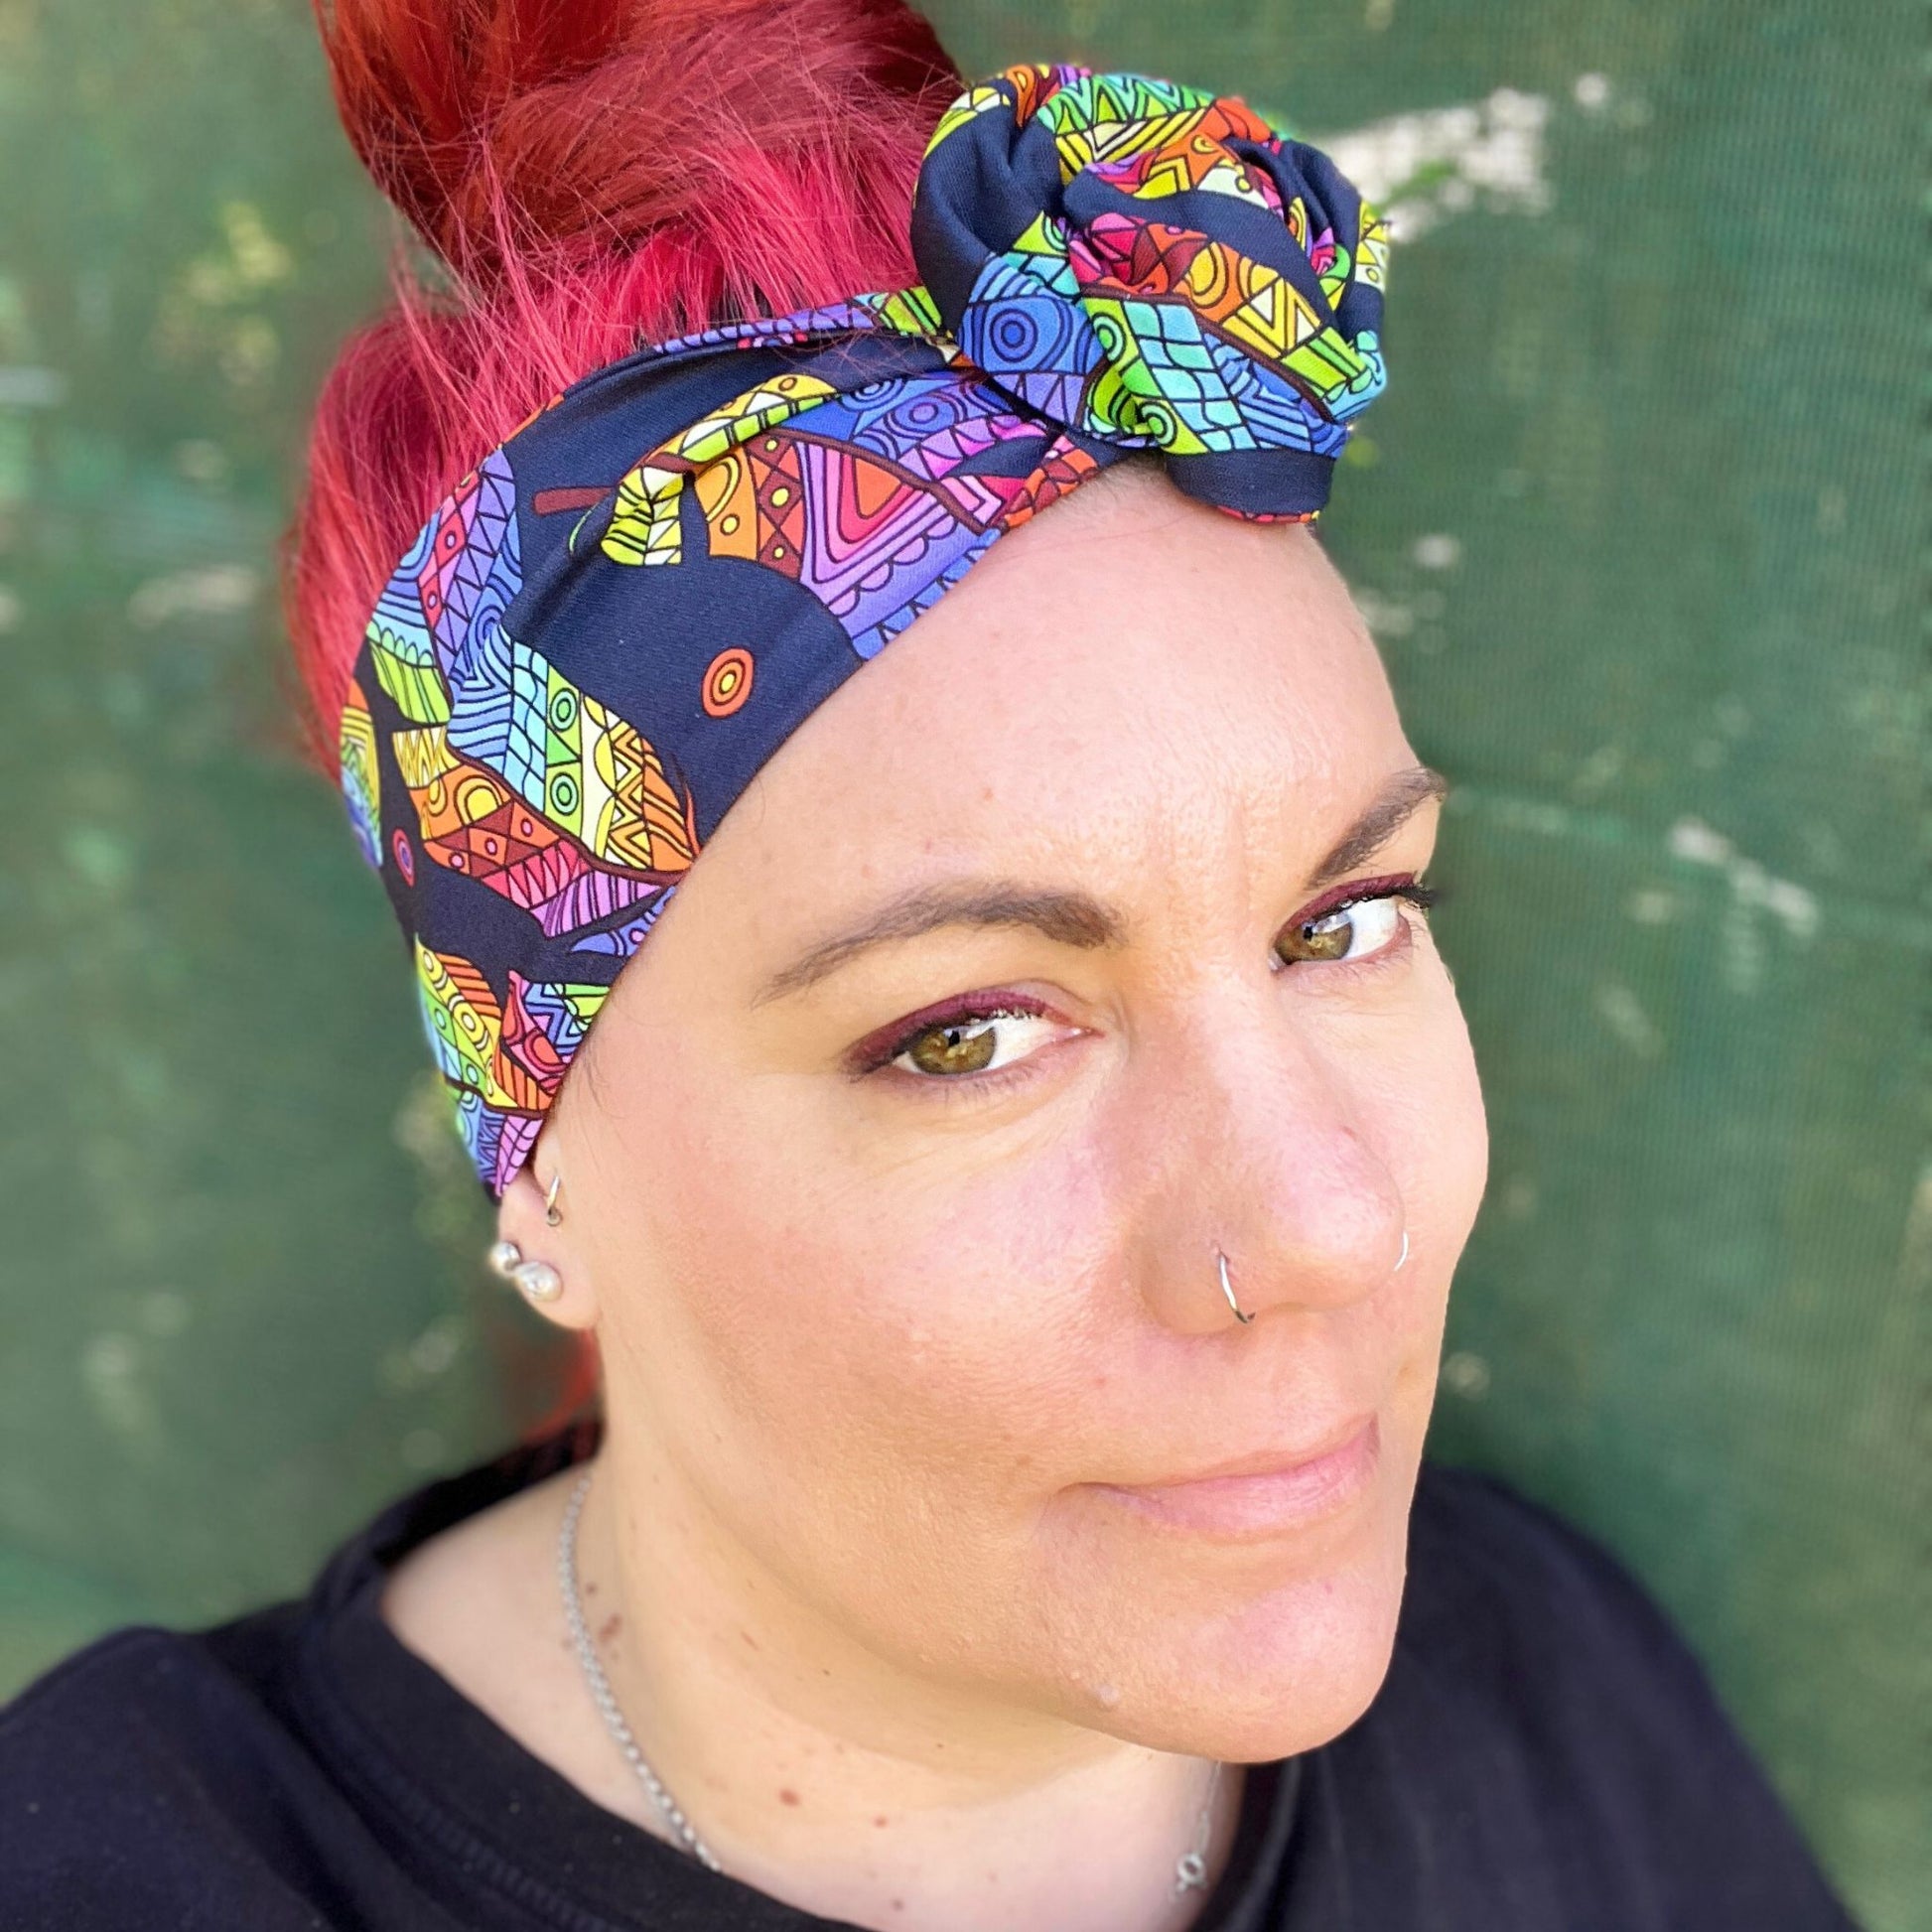 wearing a headwrap with a striking Maori-inspired feather design. The pattern is vibrant, showcasing a spectrum of colors like yellow, red, green, and blue on a dark background